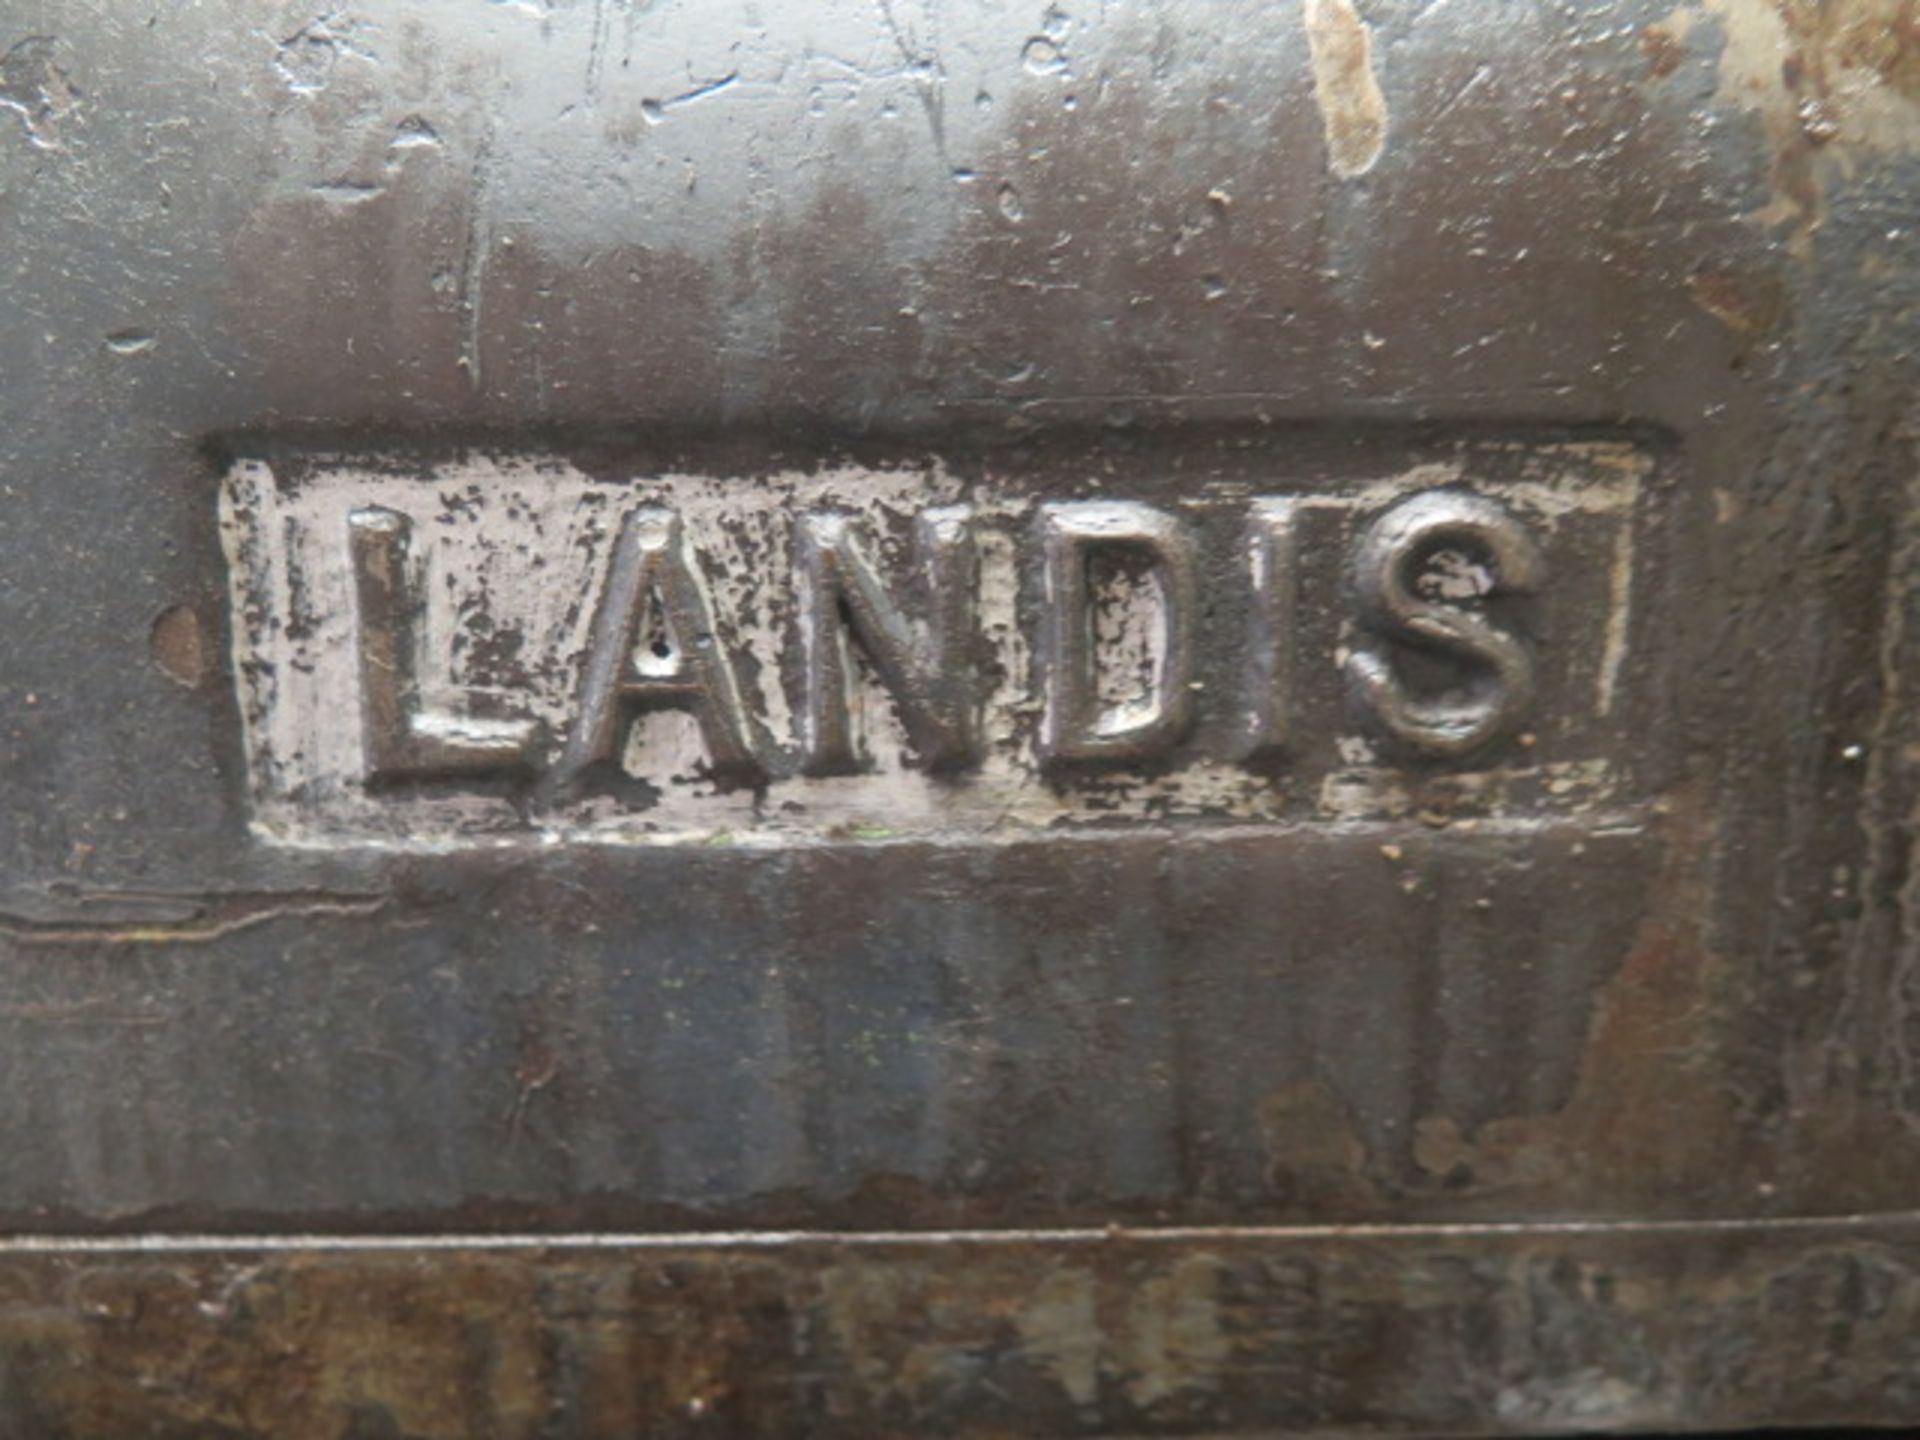 Landis 4-H plain 4” x 12” Cylindrical Grinder s/n 28453 w/ Motorized Work Head, SOLD AS IS - Image 5 of 15